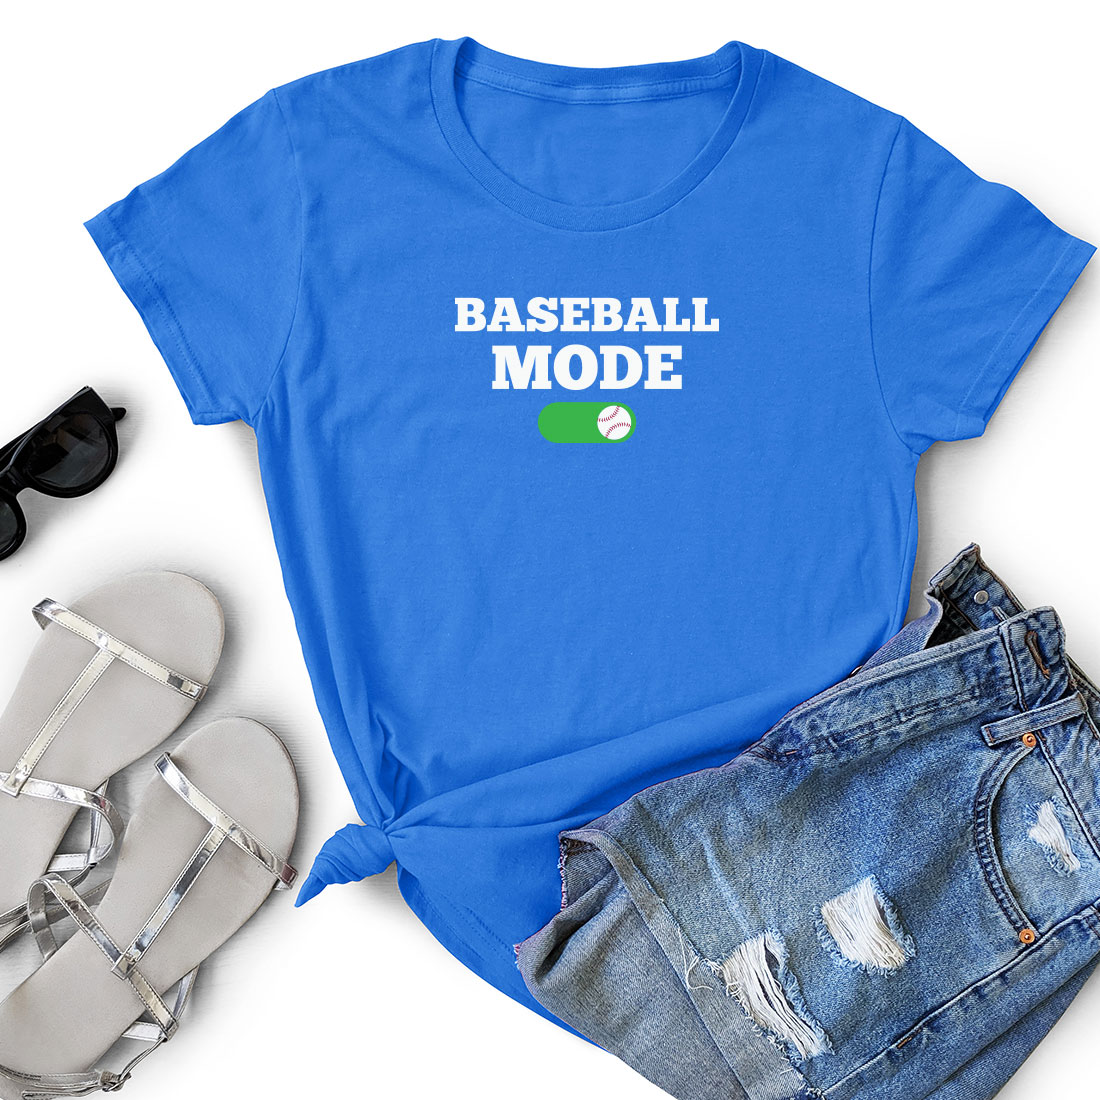 T - shirt that says baseball mode next to a pair of shorts.